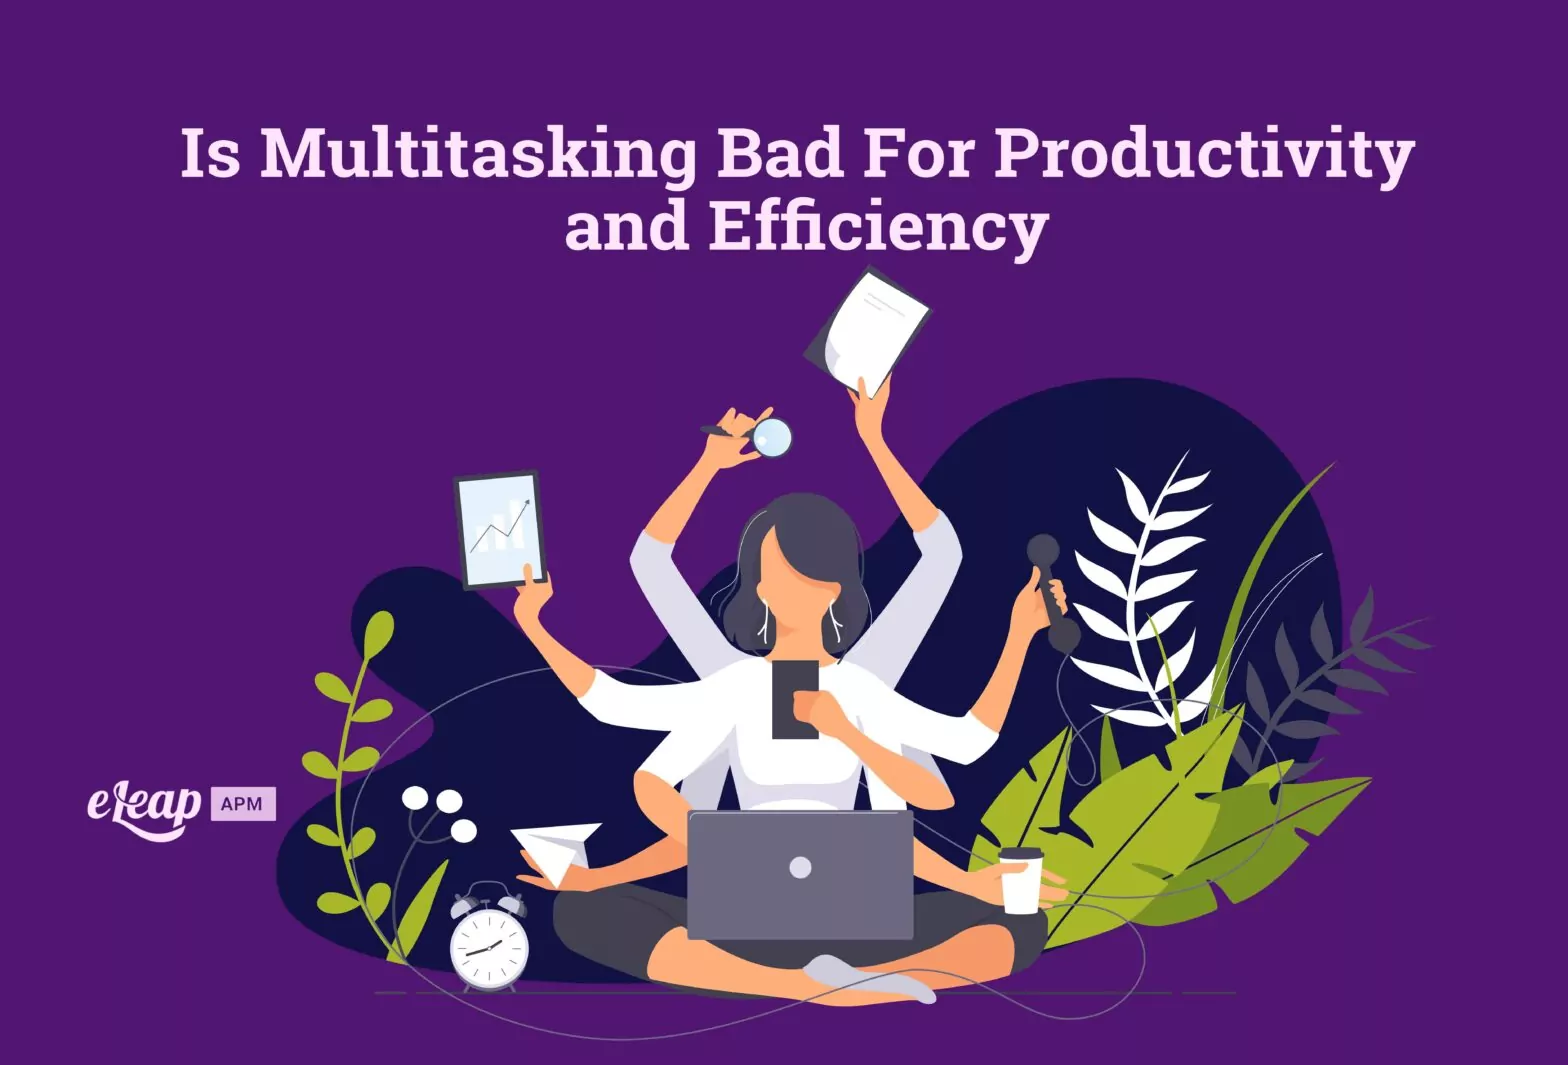 Is Multitasking Bad for Productivity and Efficiency?